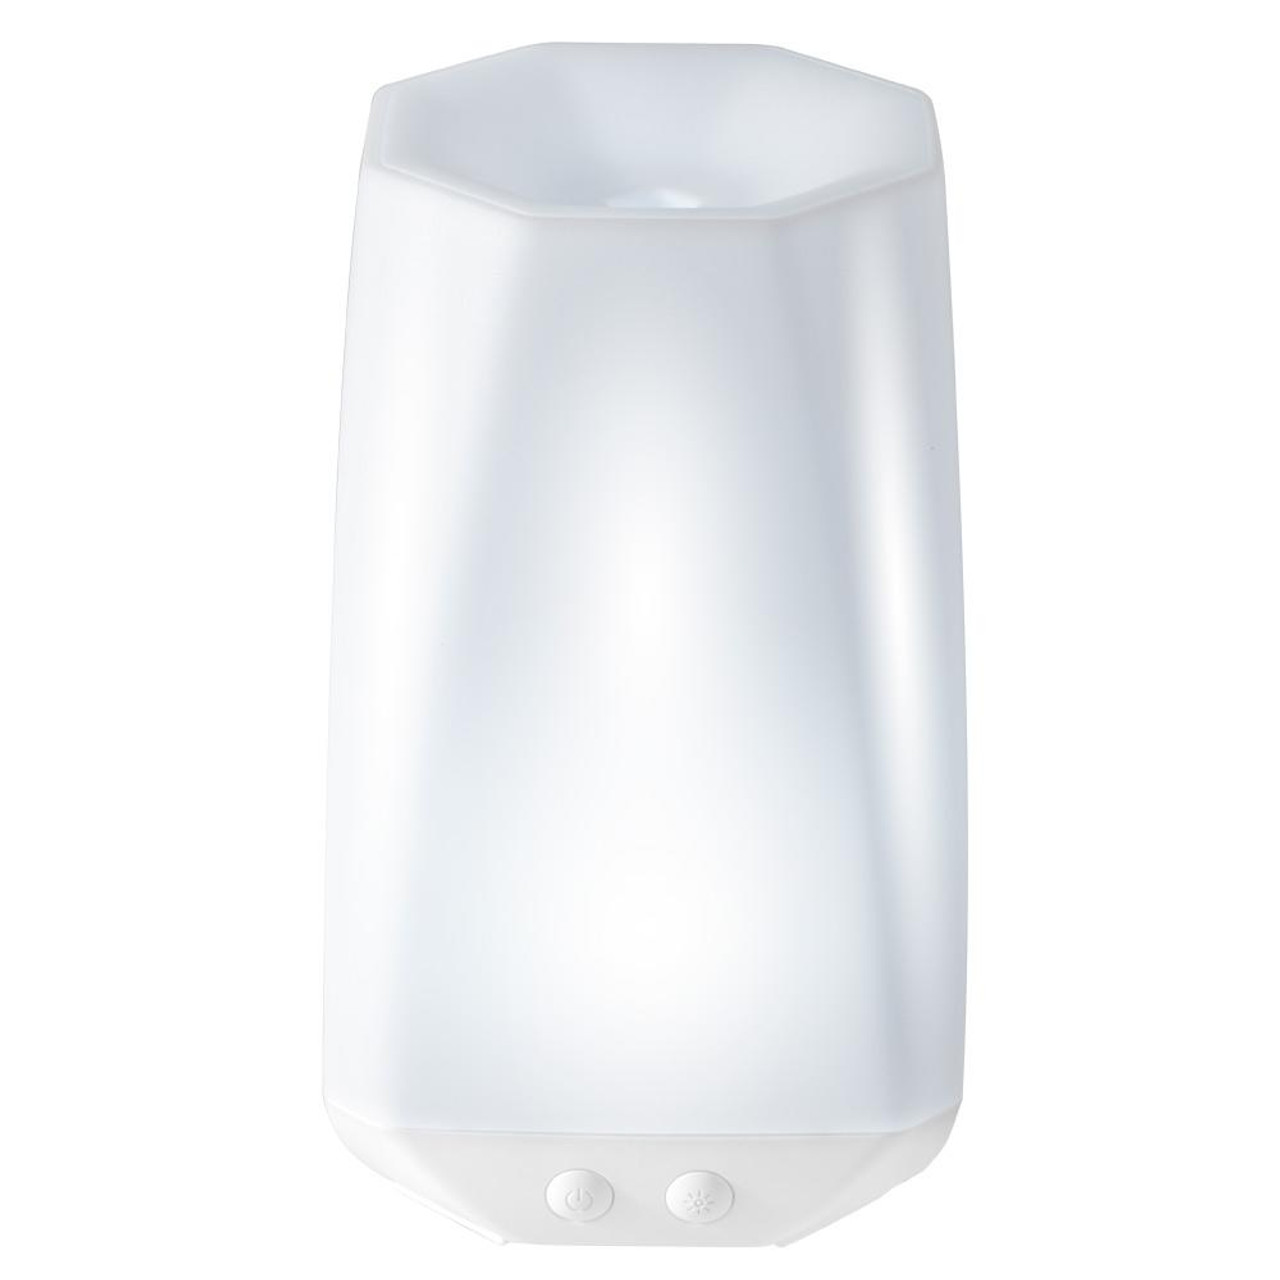 Connect Ultrasonic Aroma Diffuser for Essential Oils - Homedics